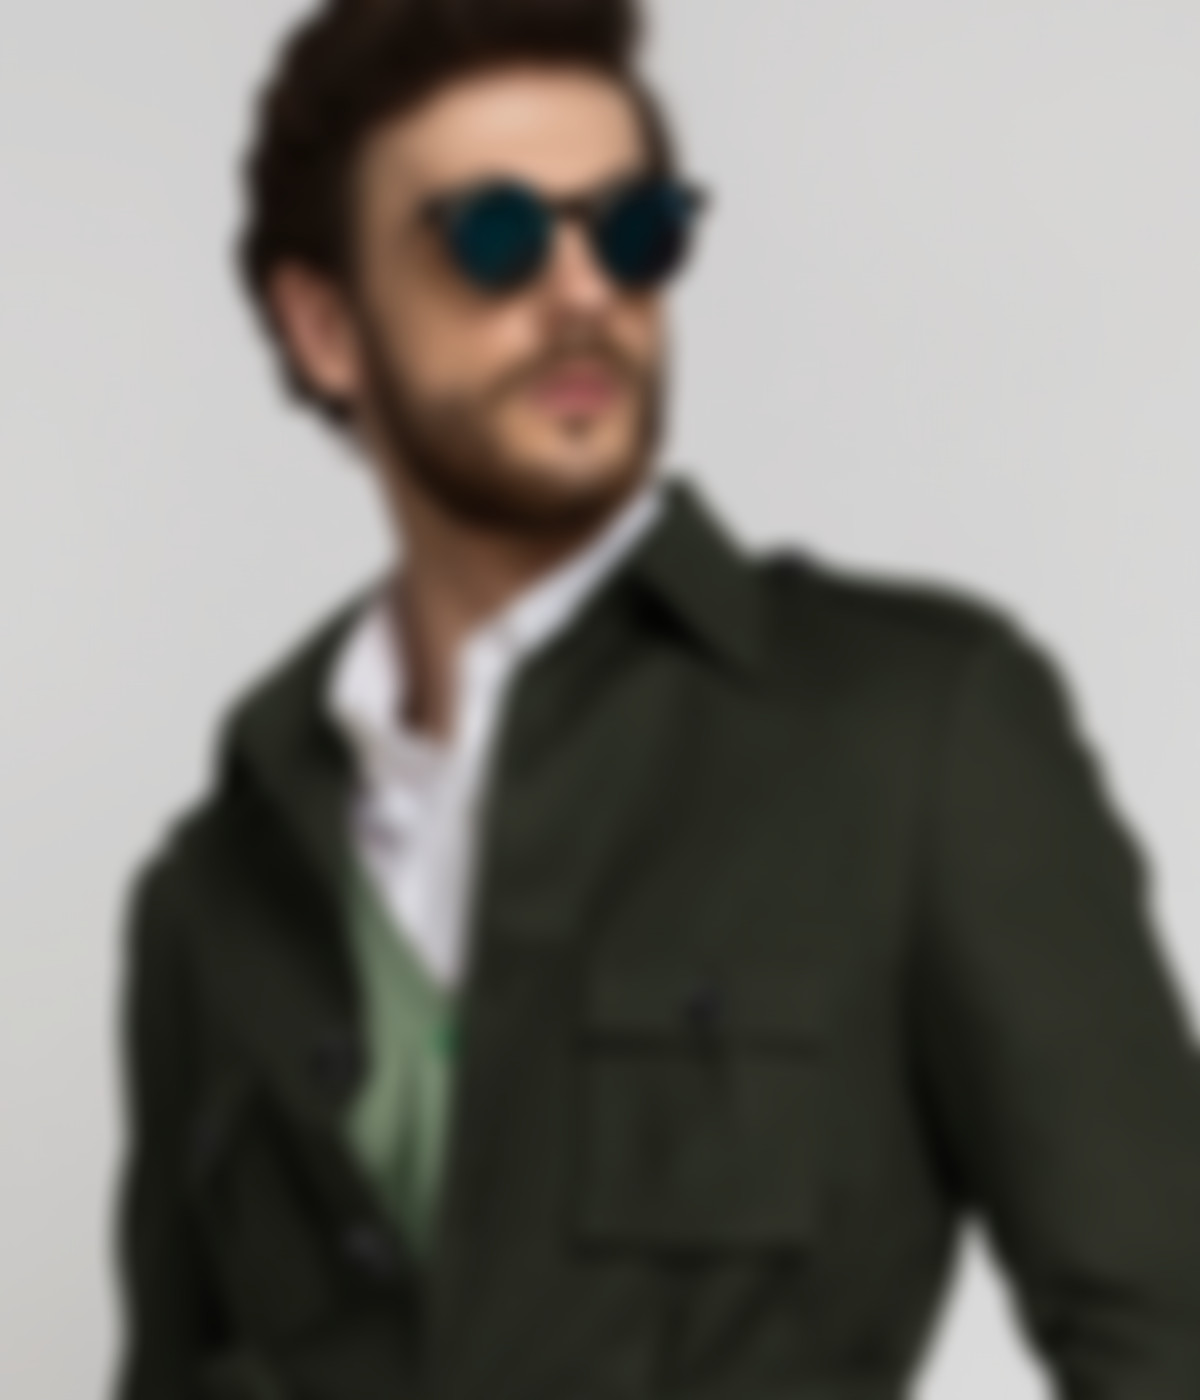 Olive Green Military Suit-1